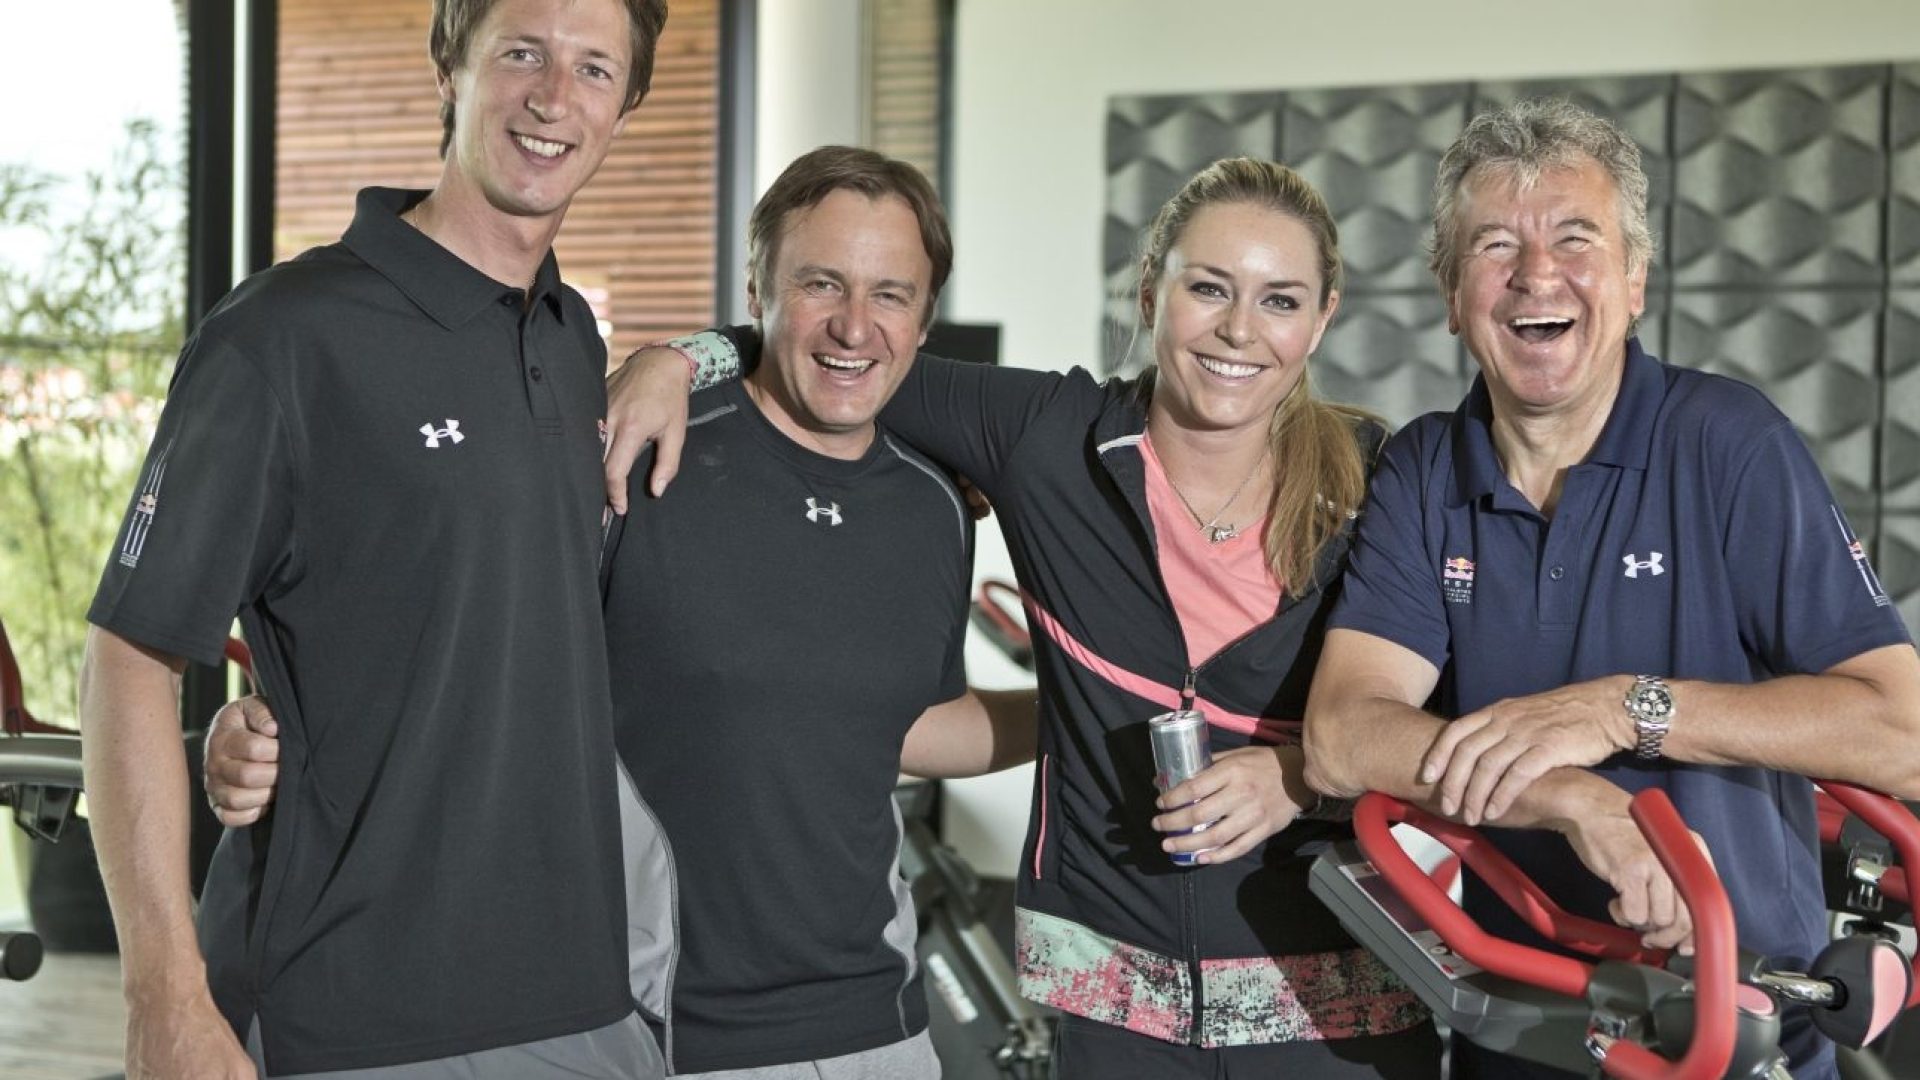 lindsey-and-the-asp-red-bull-team-from-left-to-right-physiotherapist-patrick-rottenhofer-fitness-coach-martin-hager-and-the-head-of-asp-robert-trenkwalder